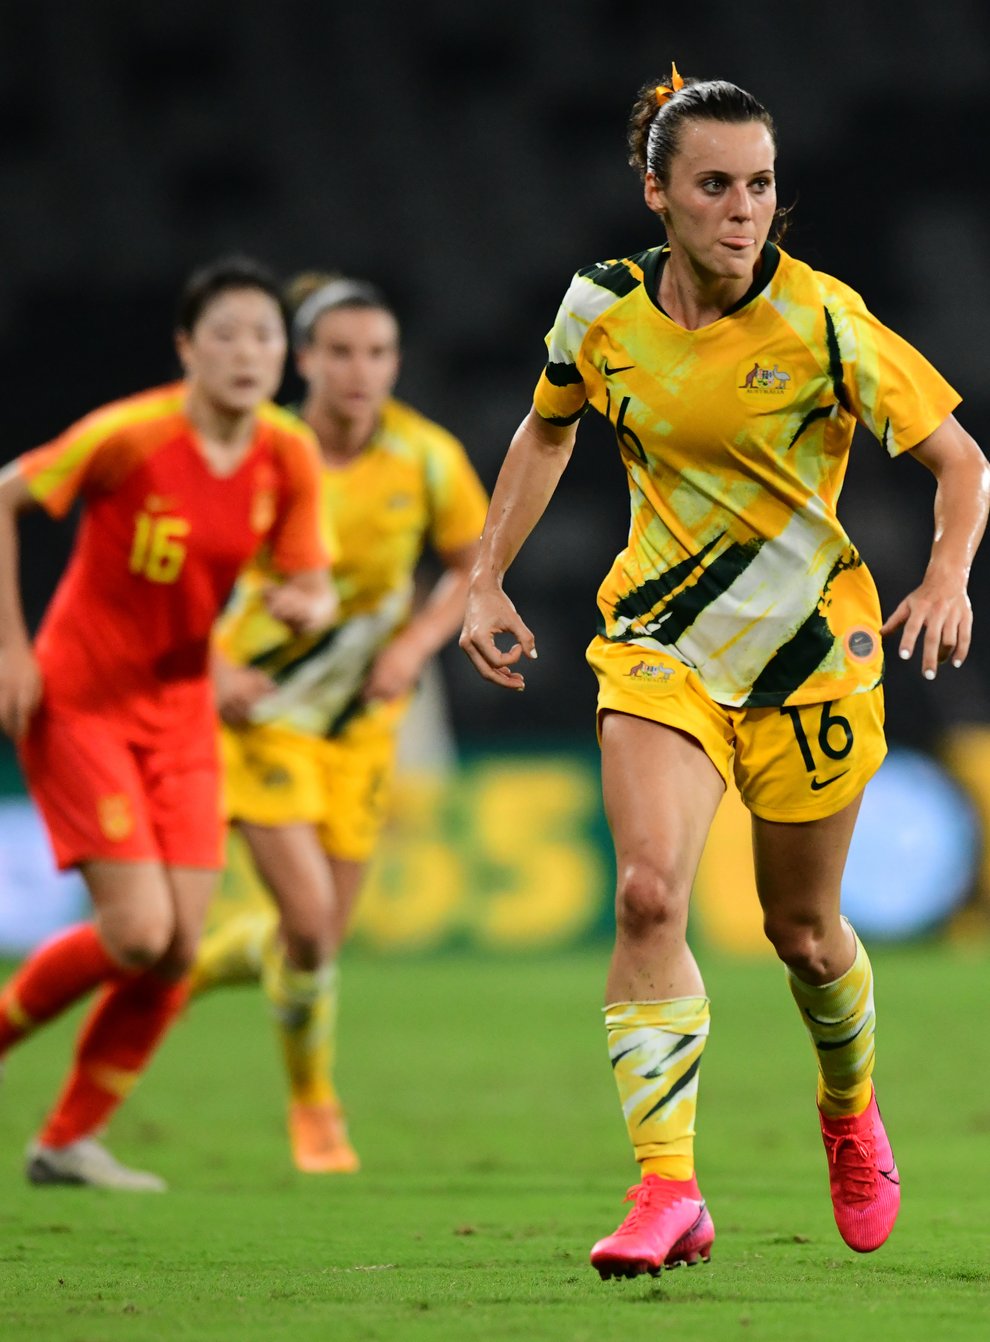 Raso was on international duty for Australia when she sustained her injury (PA Images)